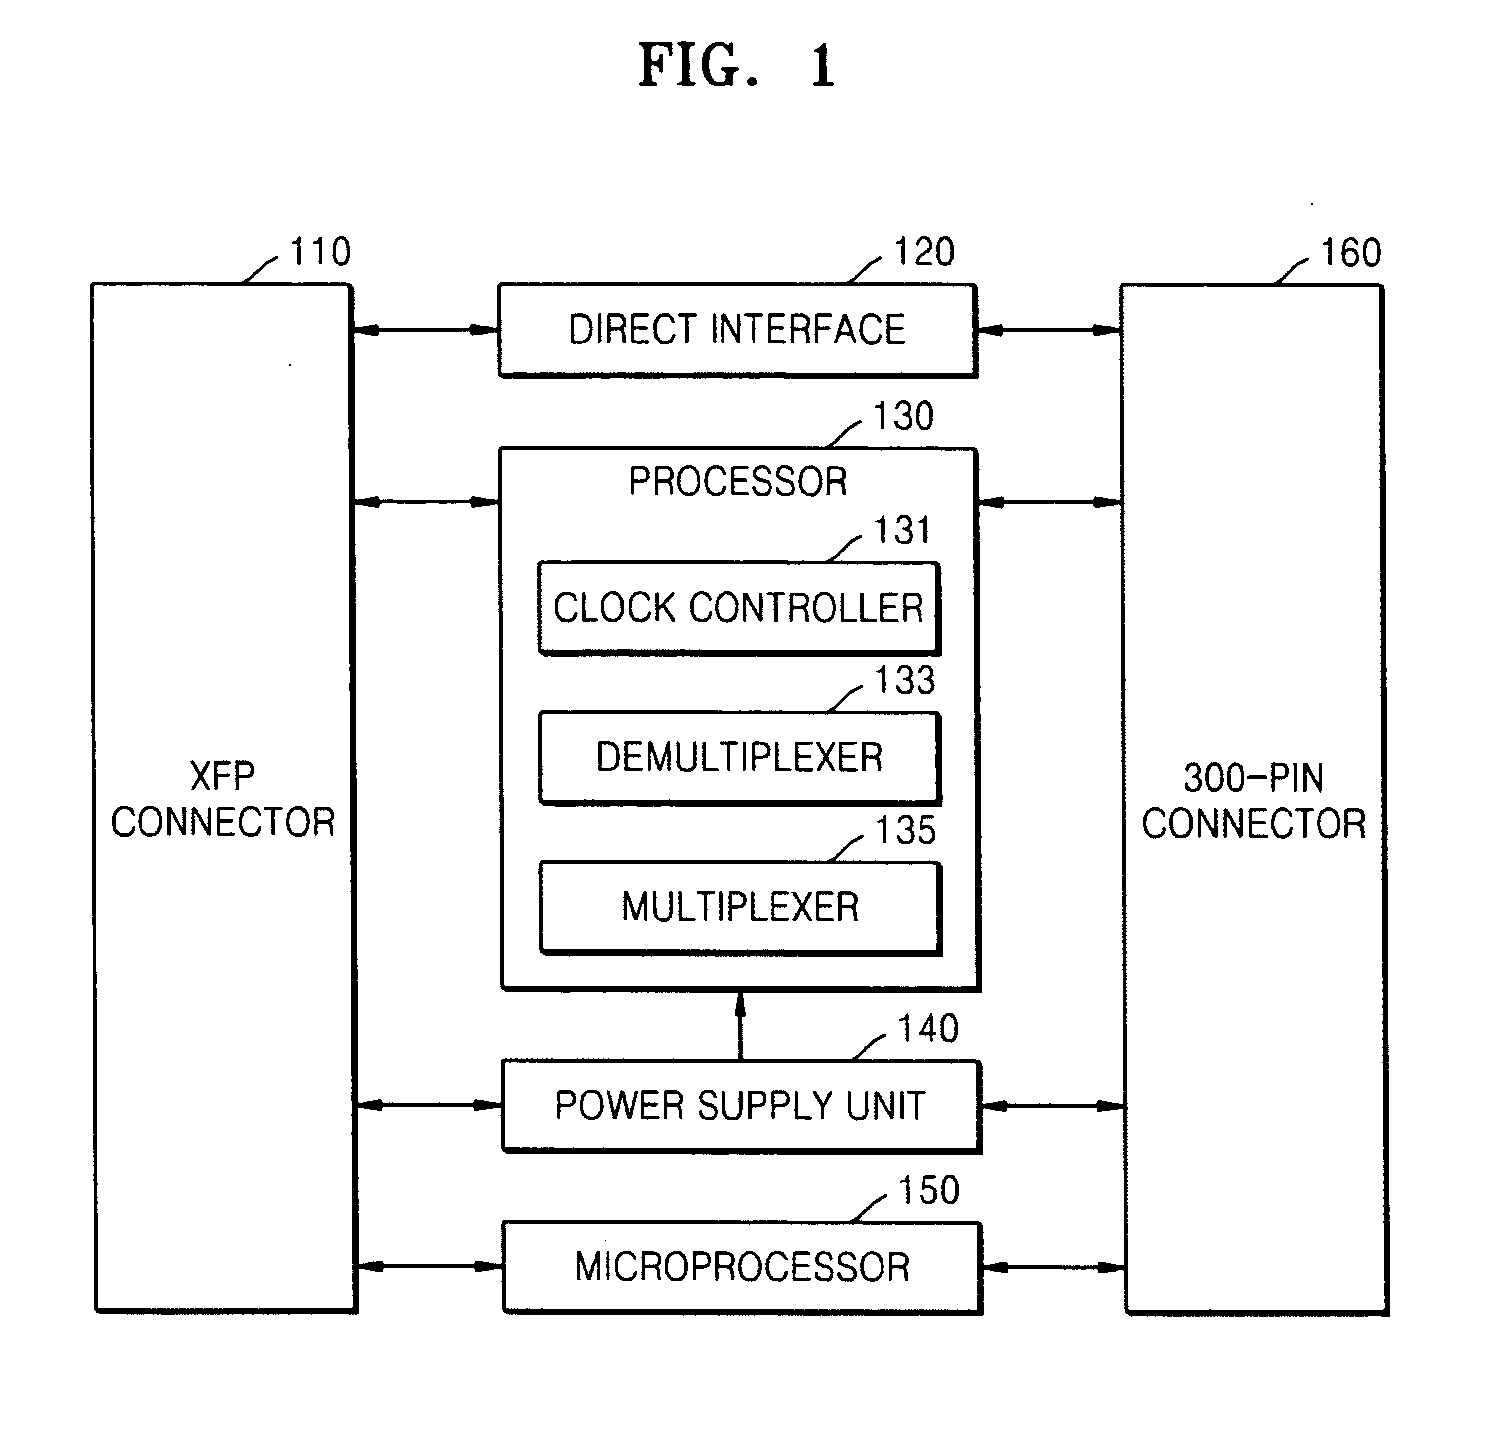 Apparatus and method for interfacing XFP optical transceiver with 300-pin MSA optical transponder